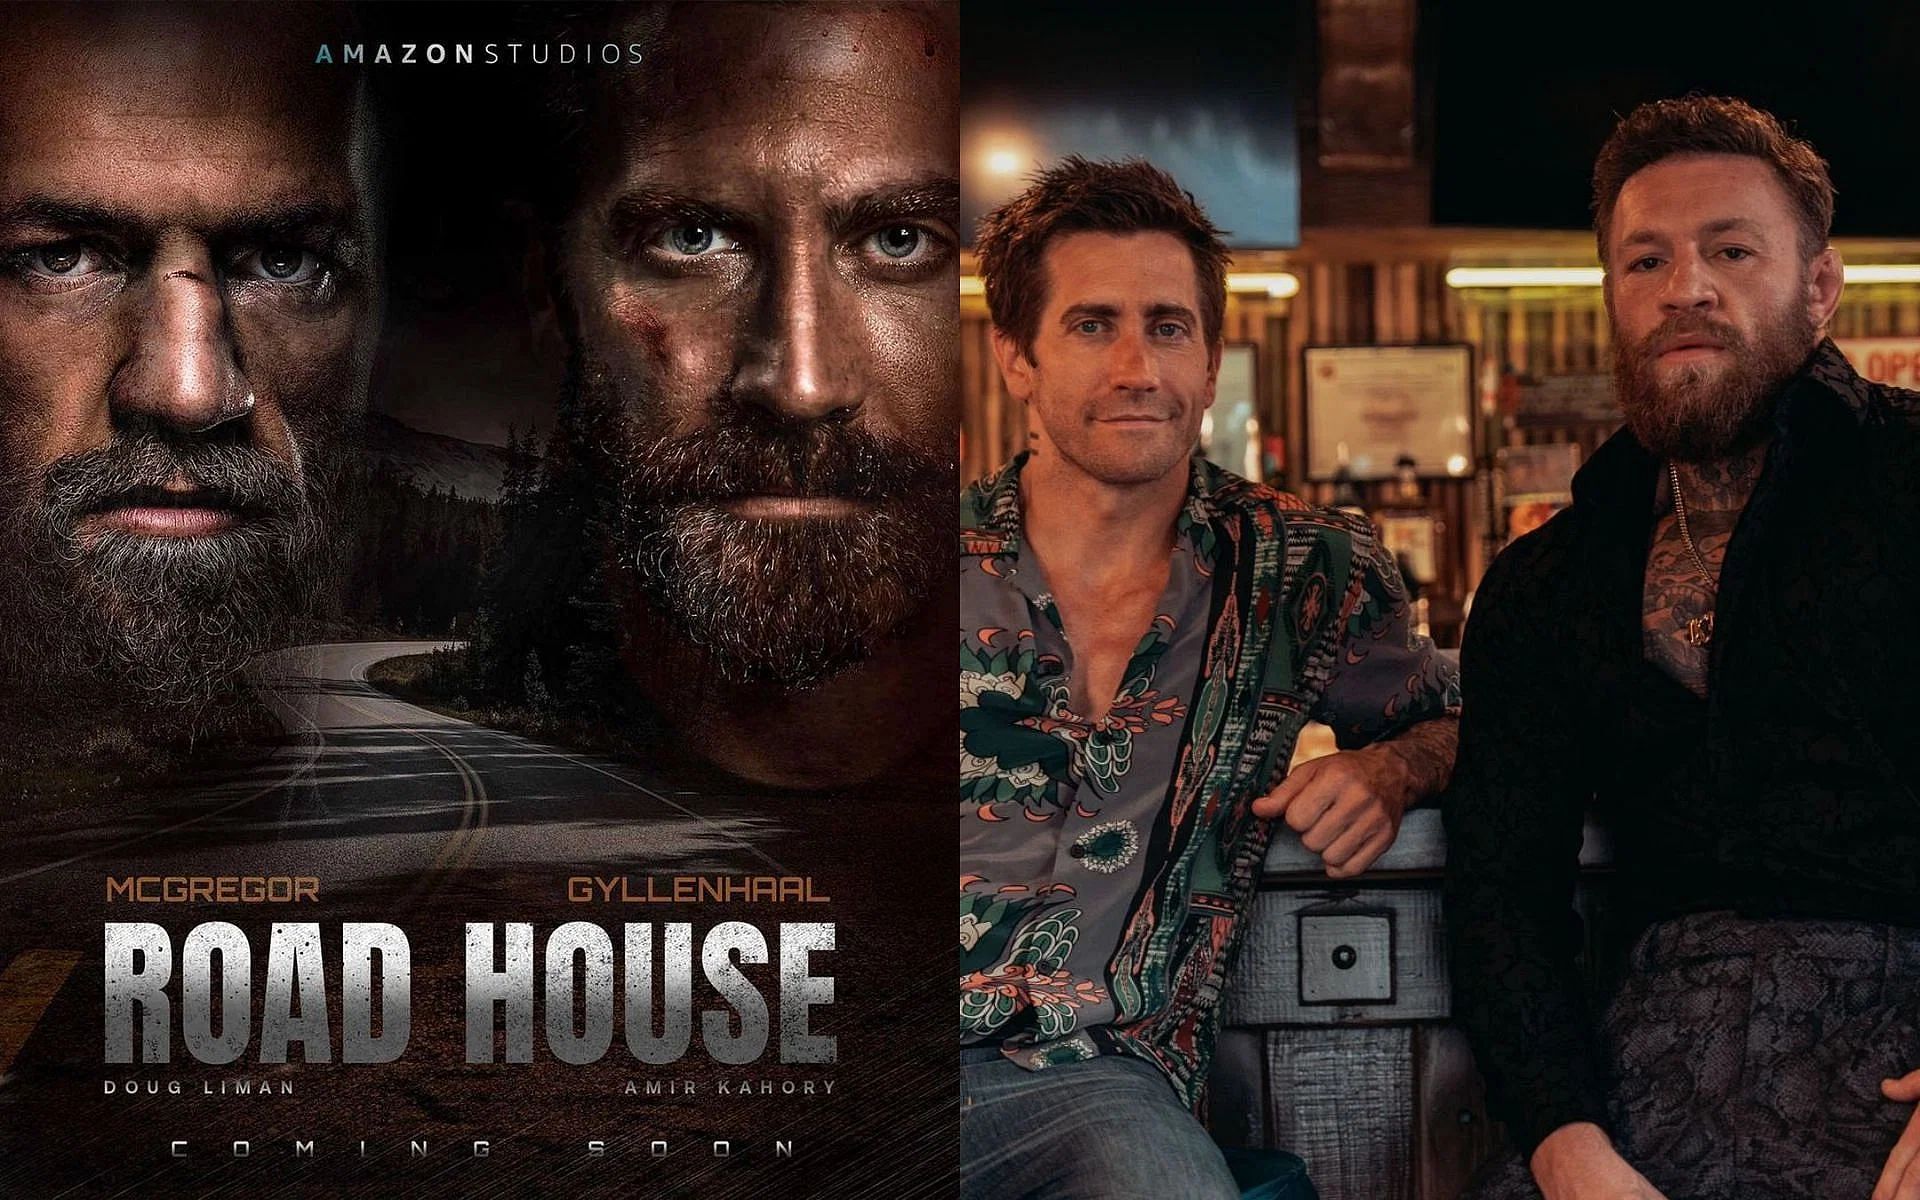 Conor McGregor is set to star alongside Jake Gyllenhaal (right) in the new Road House remake (left). [via Amazon Studios and X @TheNotoriousMMA]